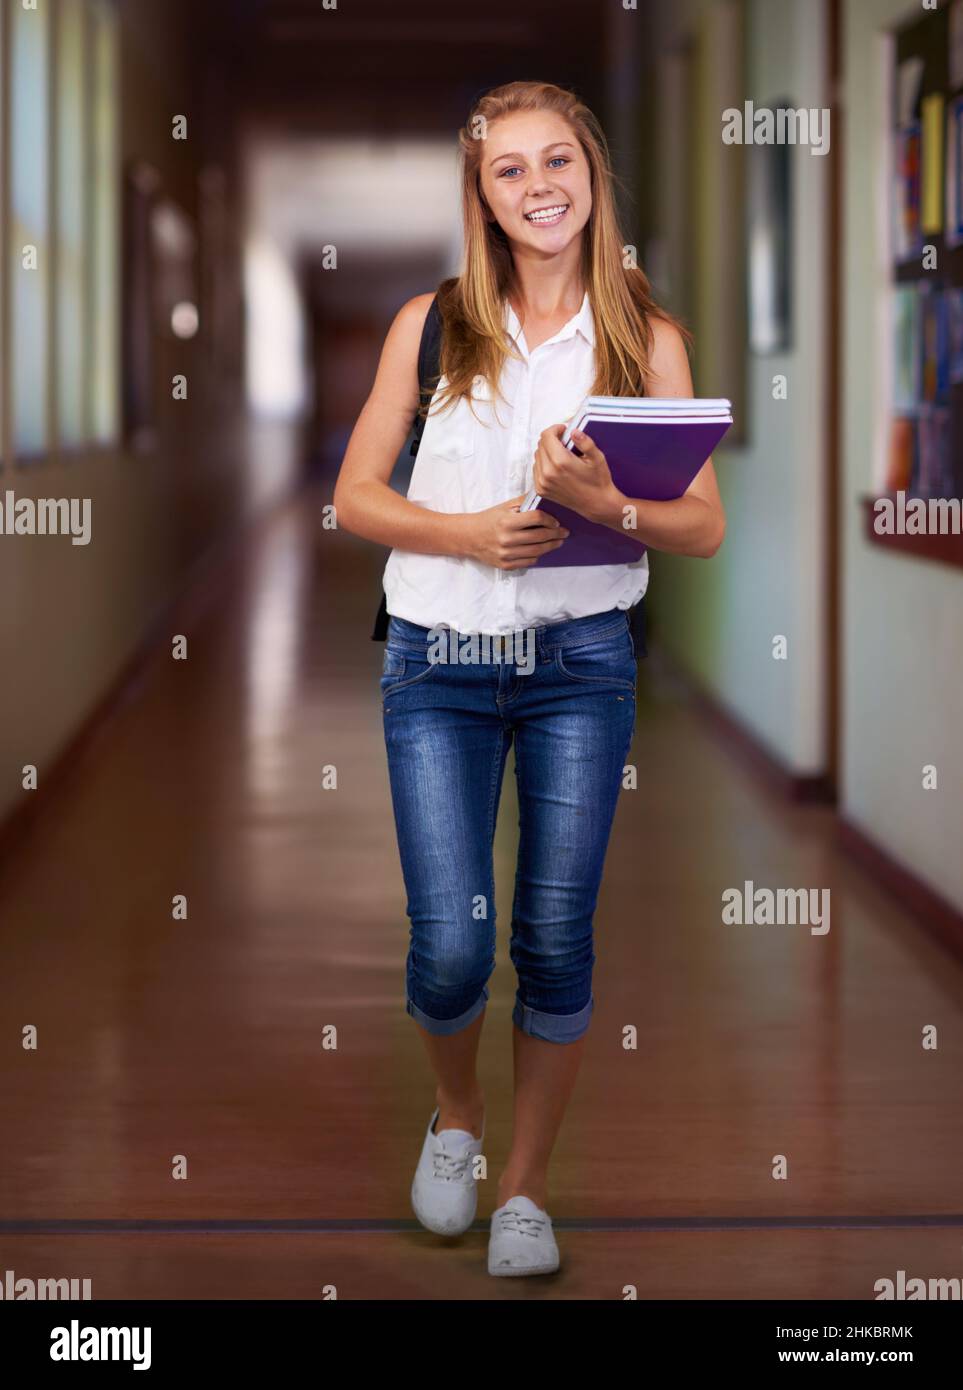 She's a diligent student. Shot of a young girl in her school hallway. Stock Photo